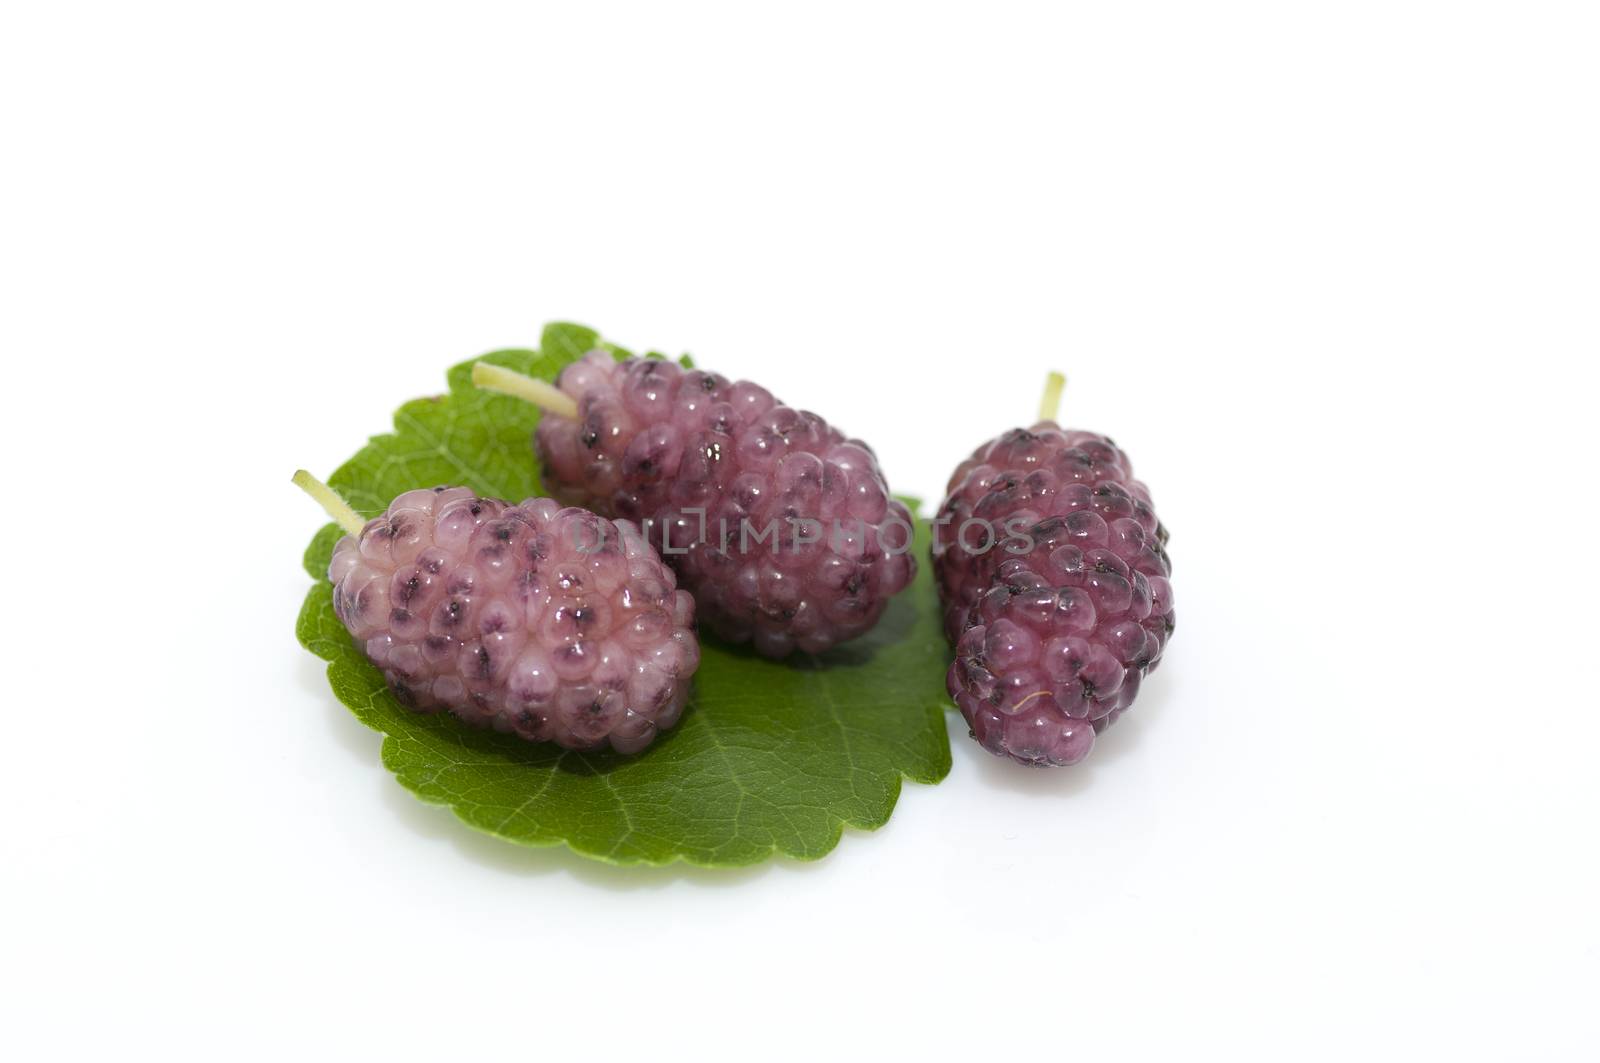 Ripe organic mulberries by dred